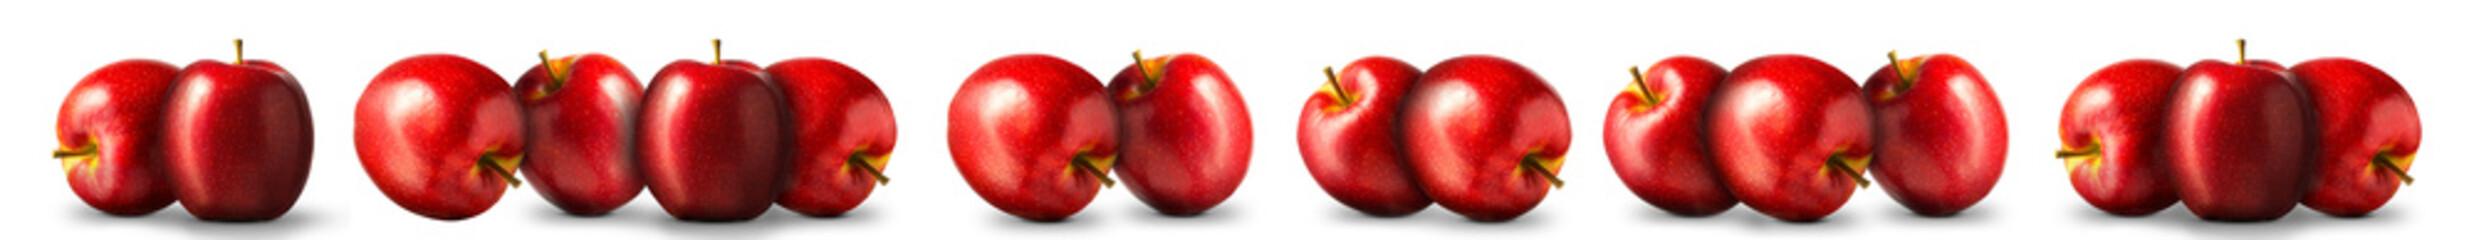 Group of red apple on white background